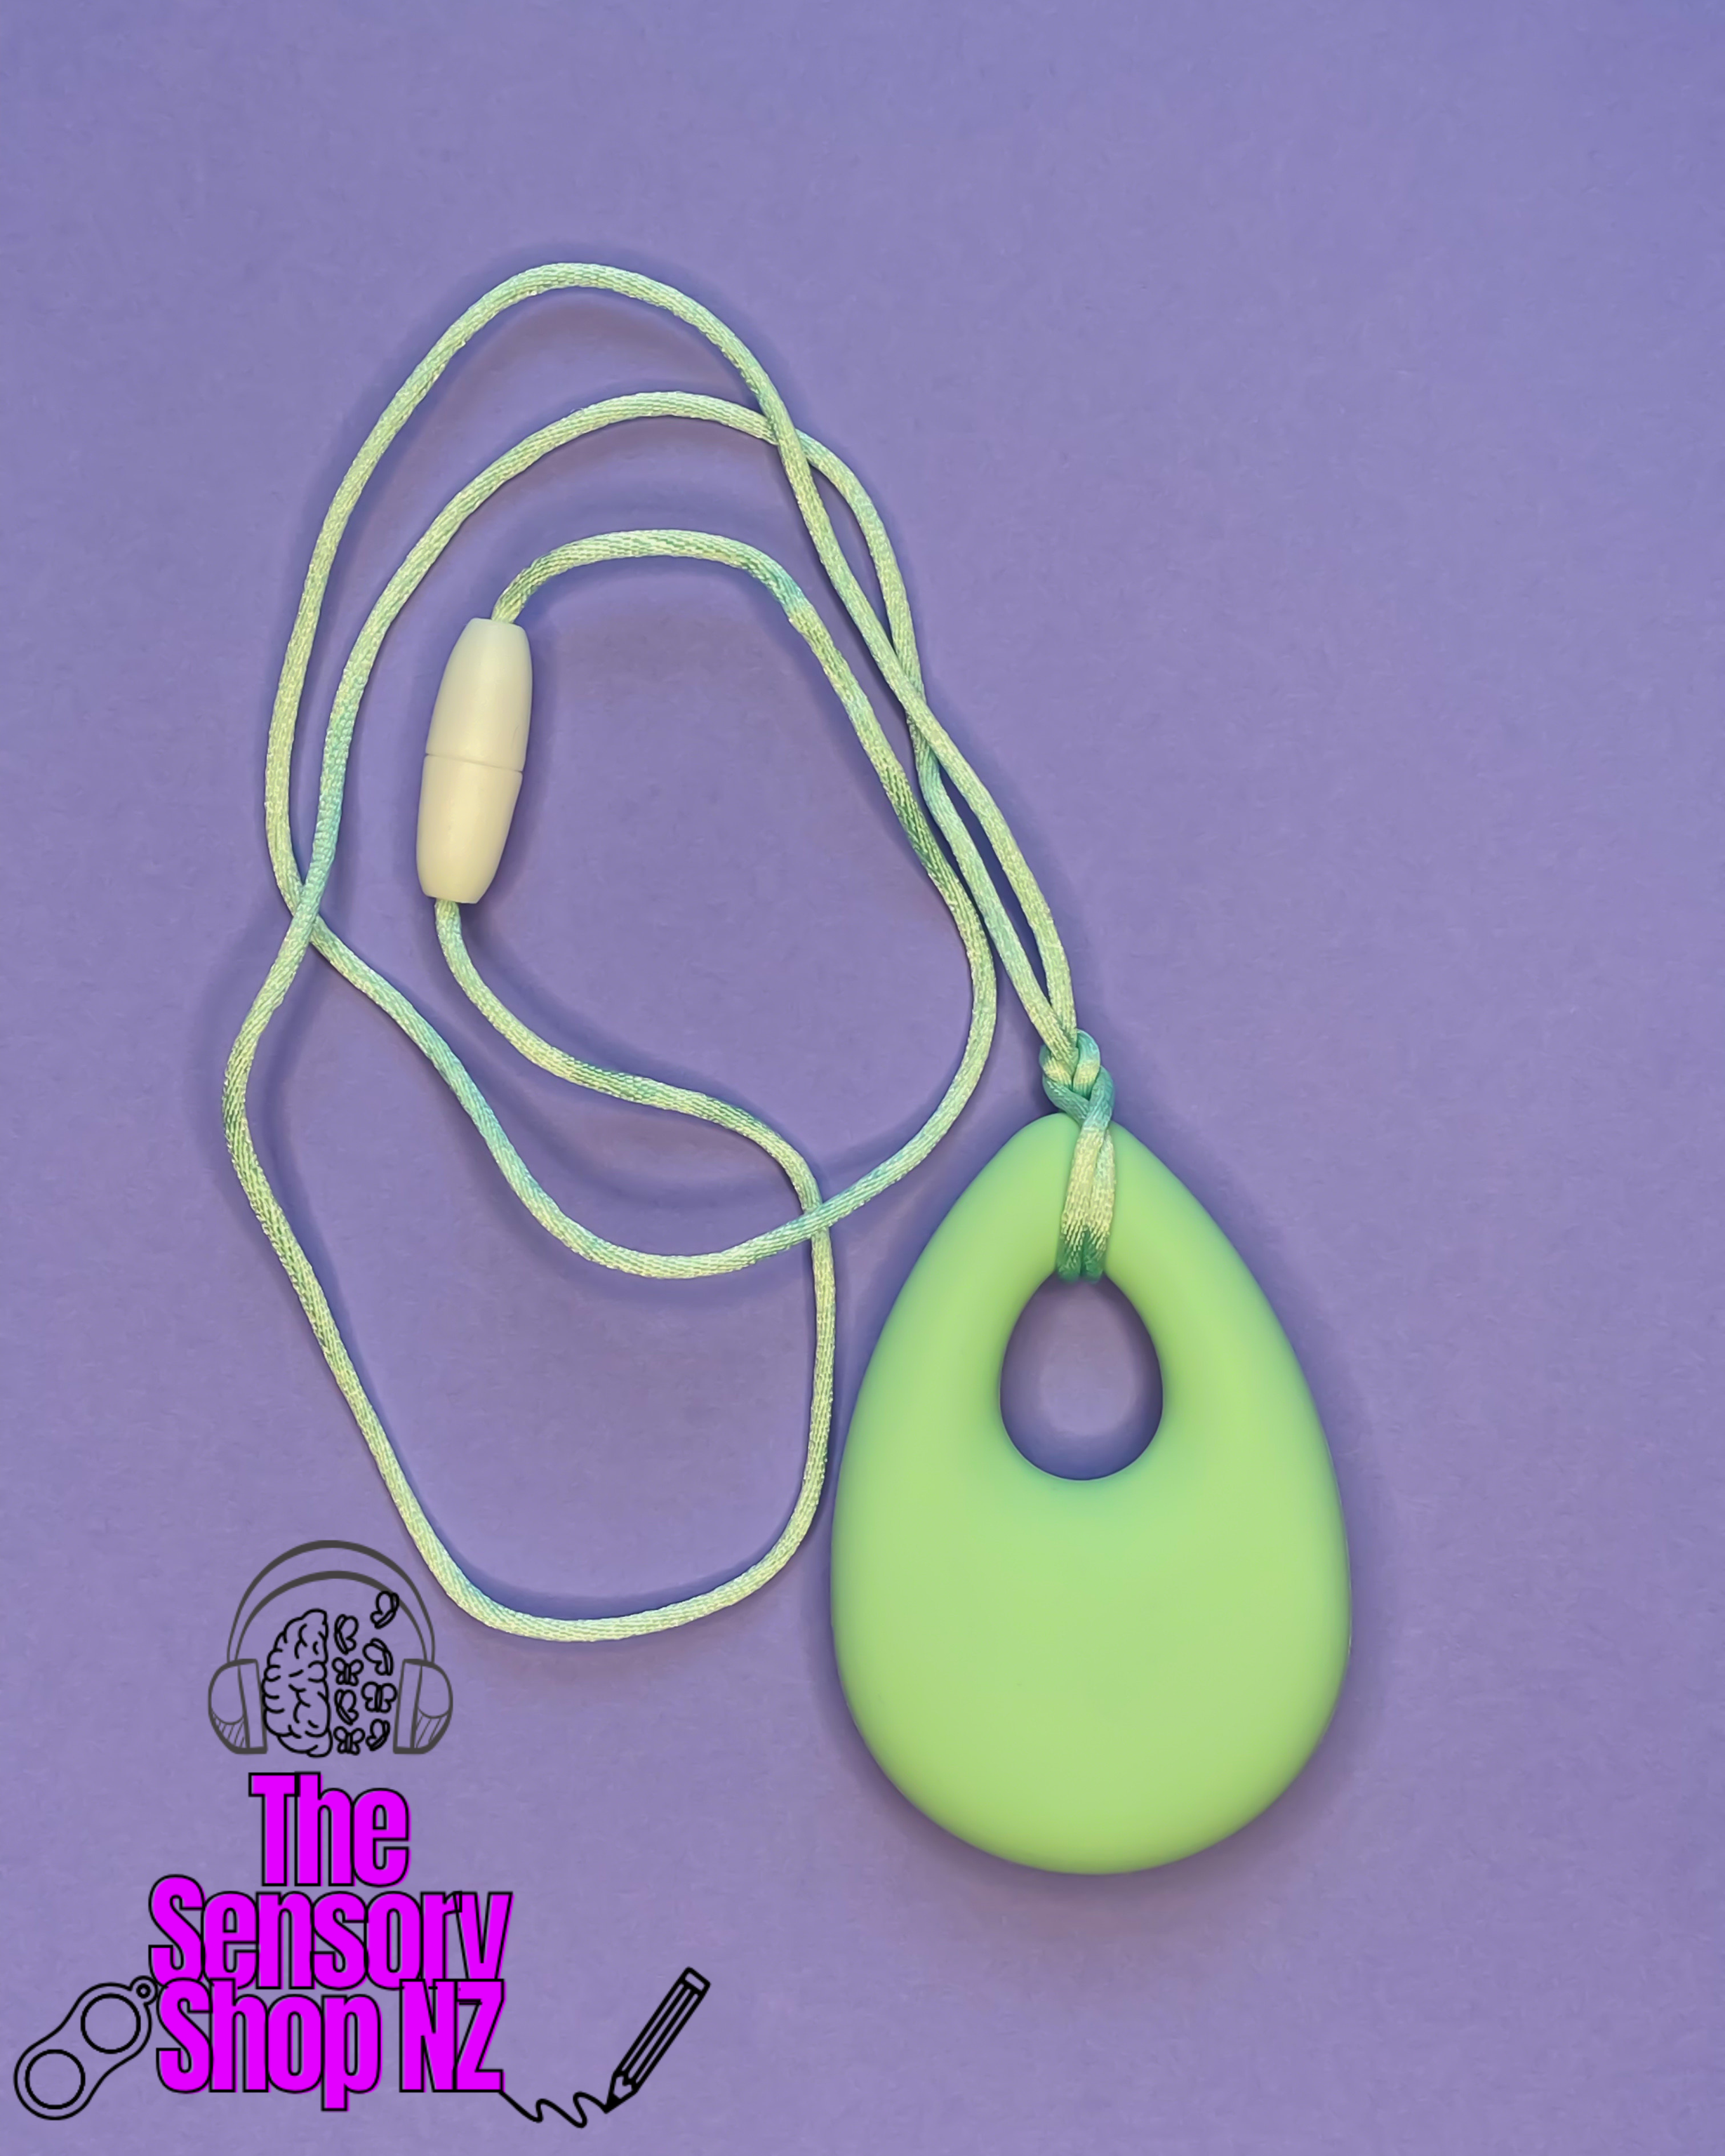 Fakespot | Tilcare Chew Chew Sensory Necklace B... Fake Review